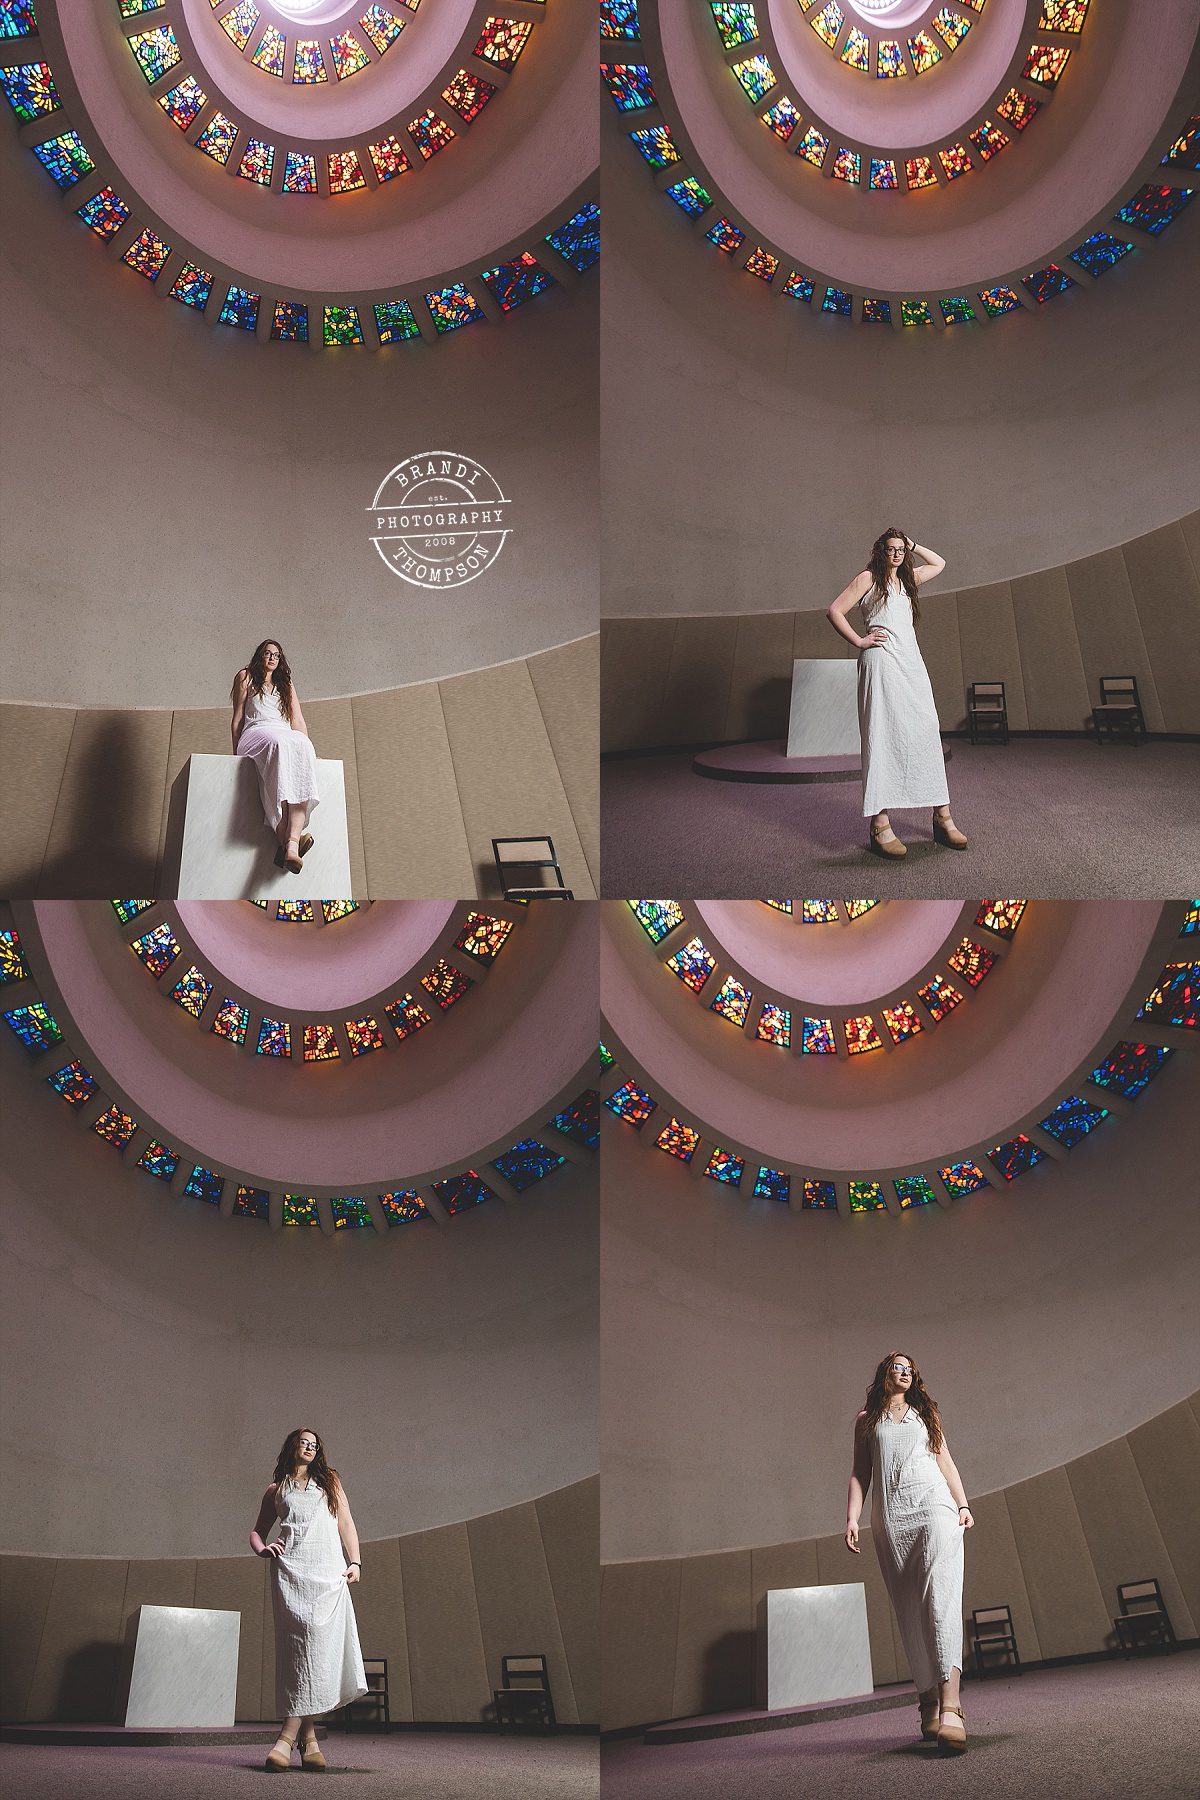 photo collage of light skinned young woman with long auburn hair and a white dress. She is in a concrete room with a swirl stained glass ceiling